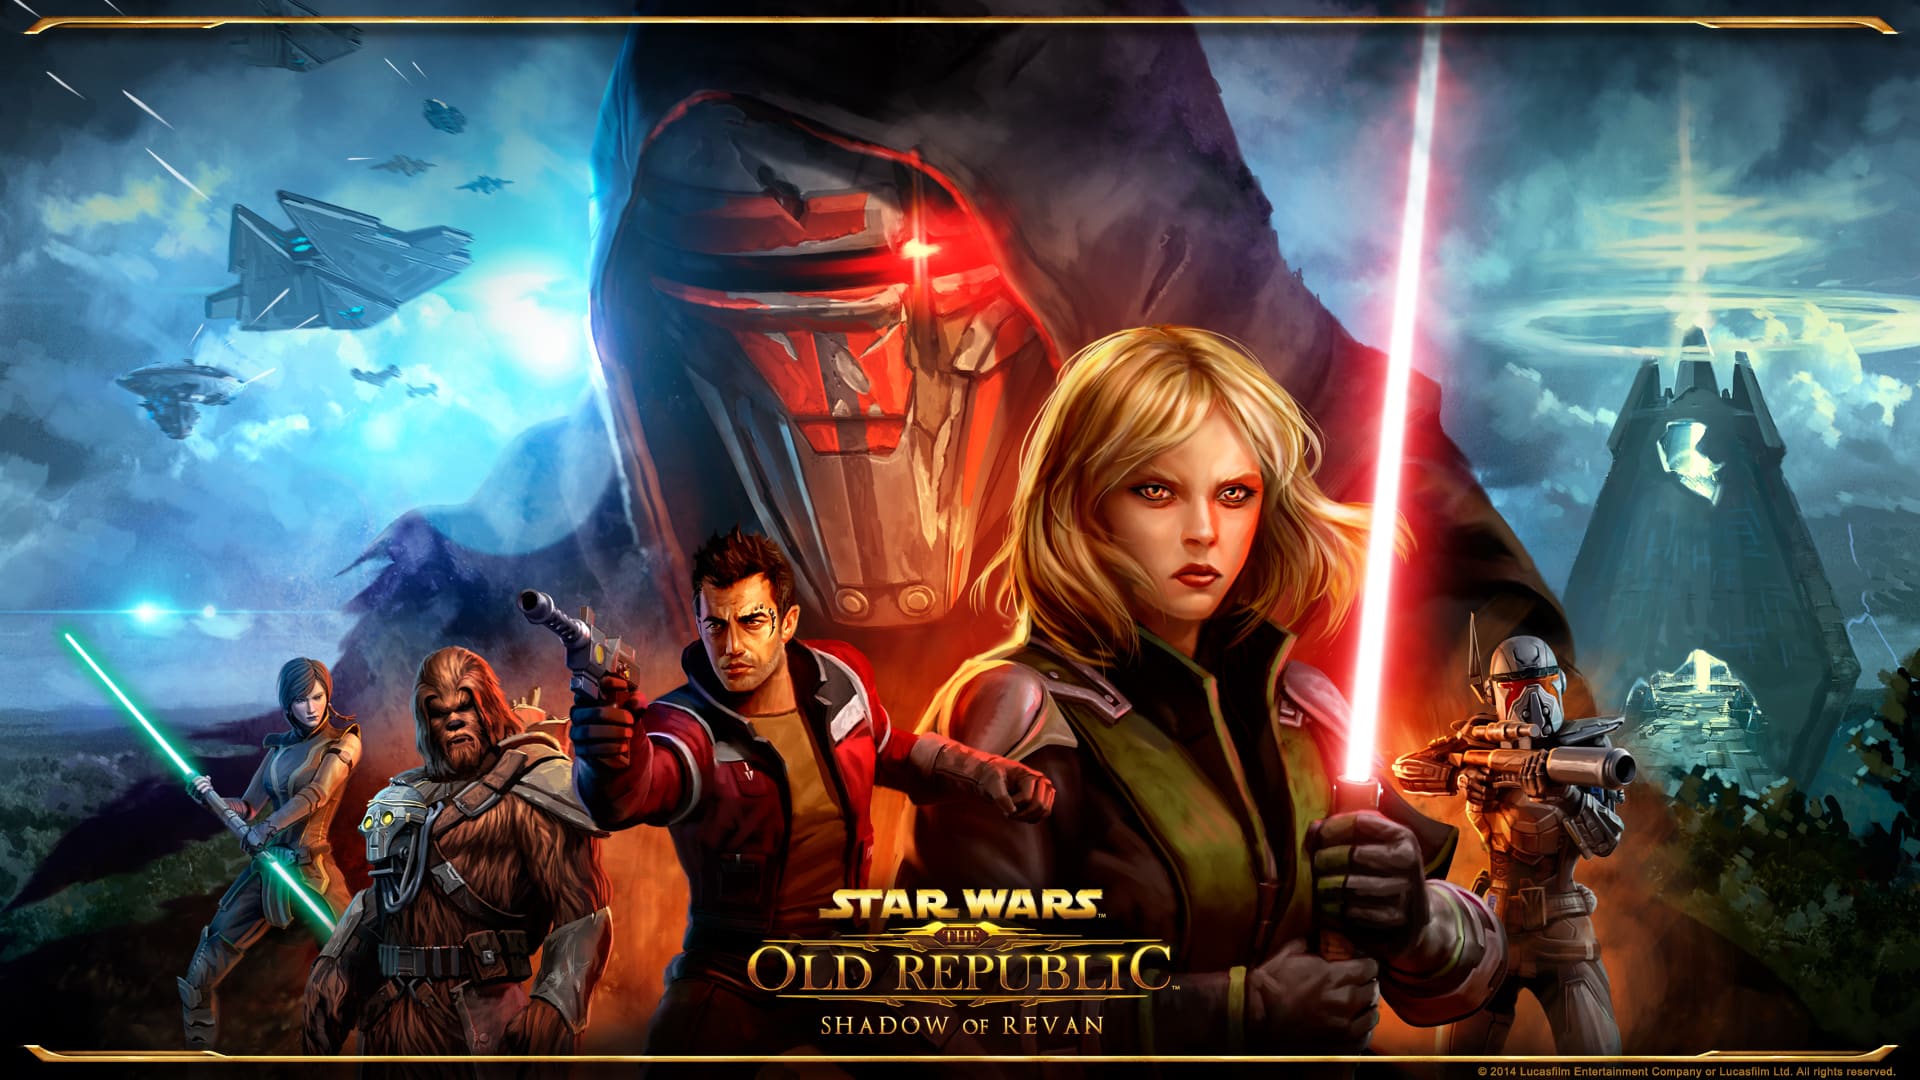 star wars the old republic online legacy